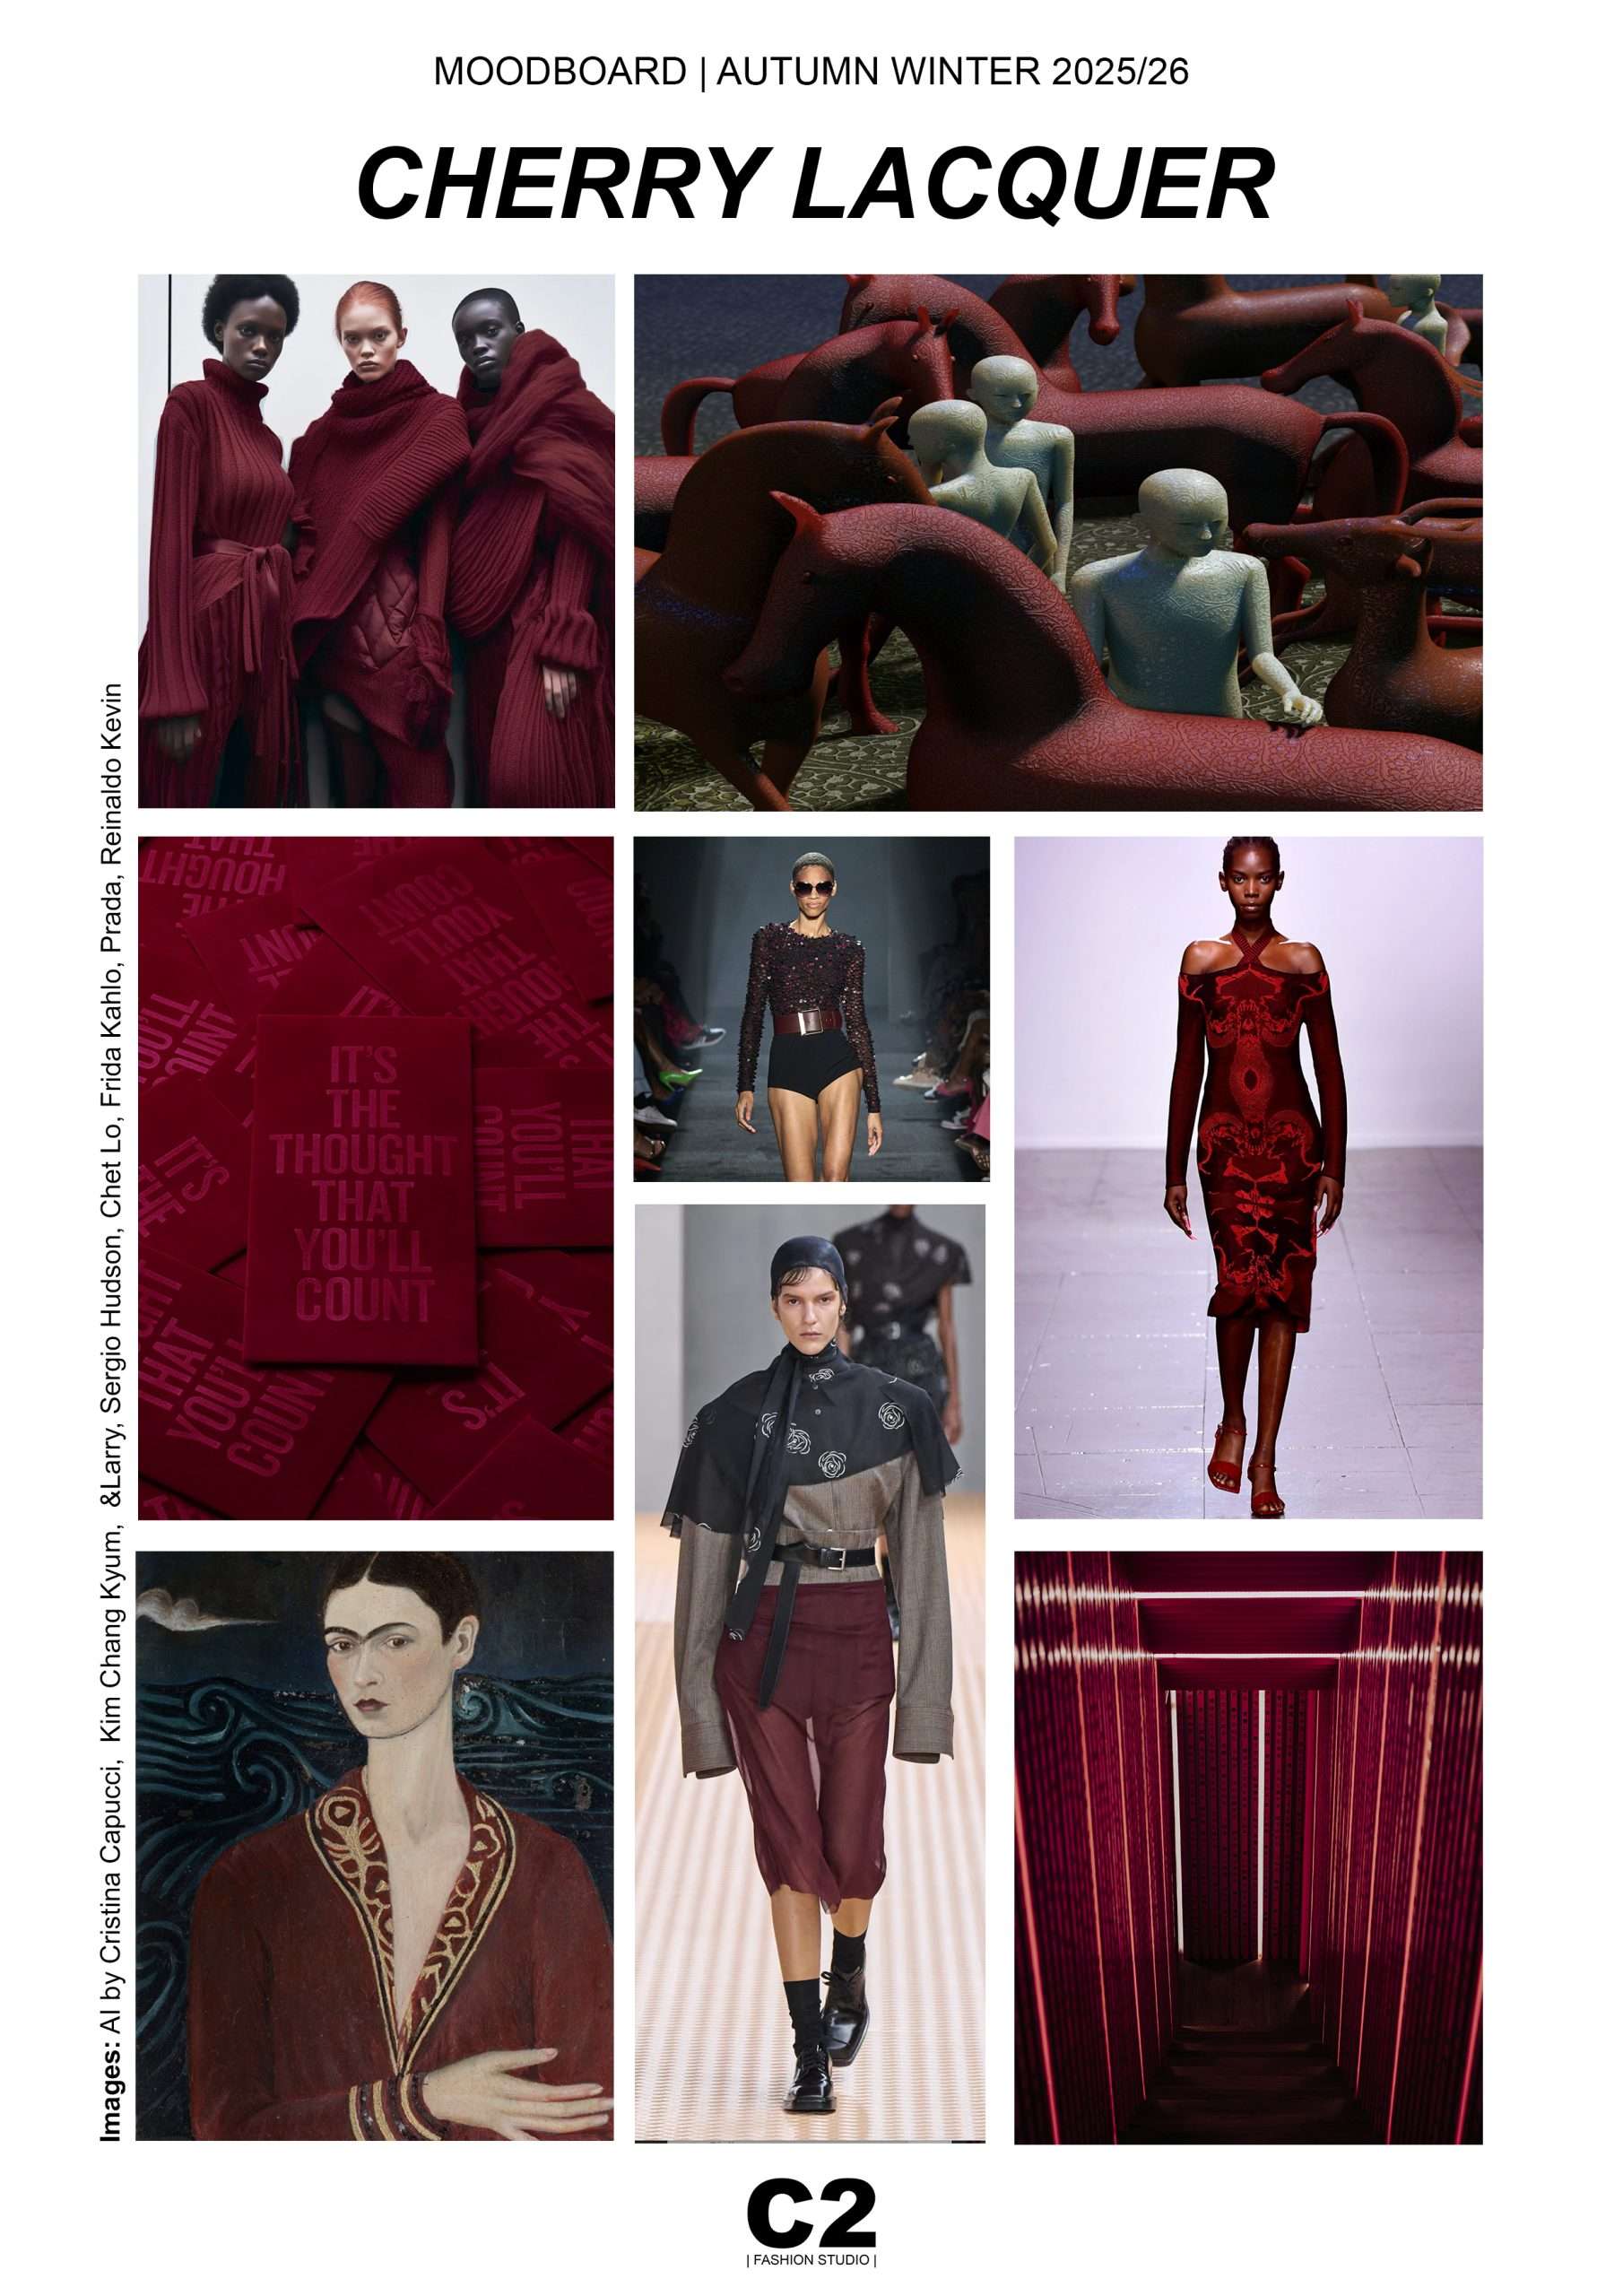 2025 2026 Fashion Trends WGSN and Coloro Reveal the Key Colors for the